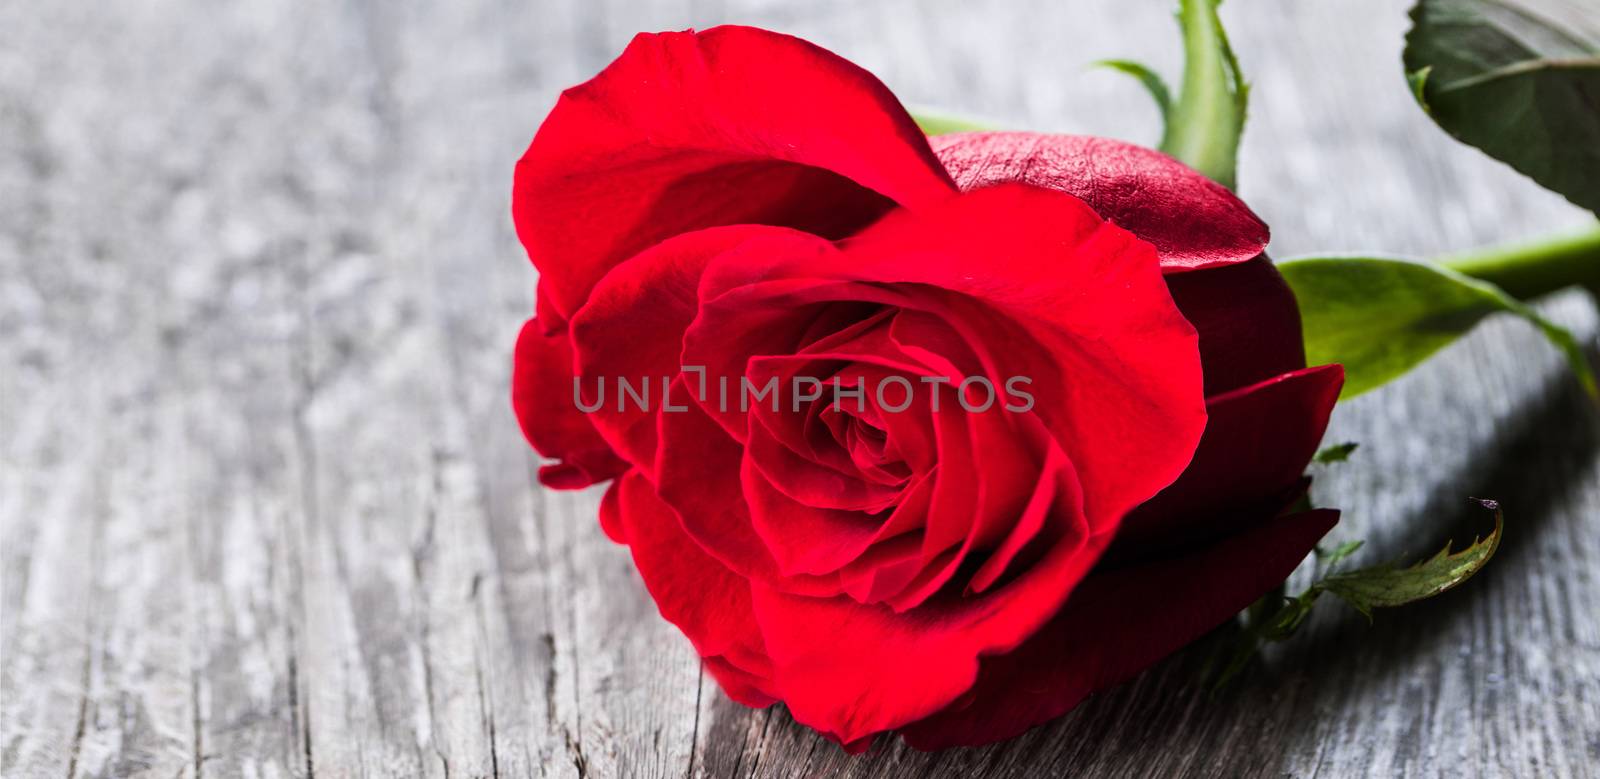 Red rose on wood by Yellowj